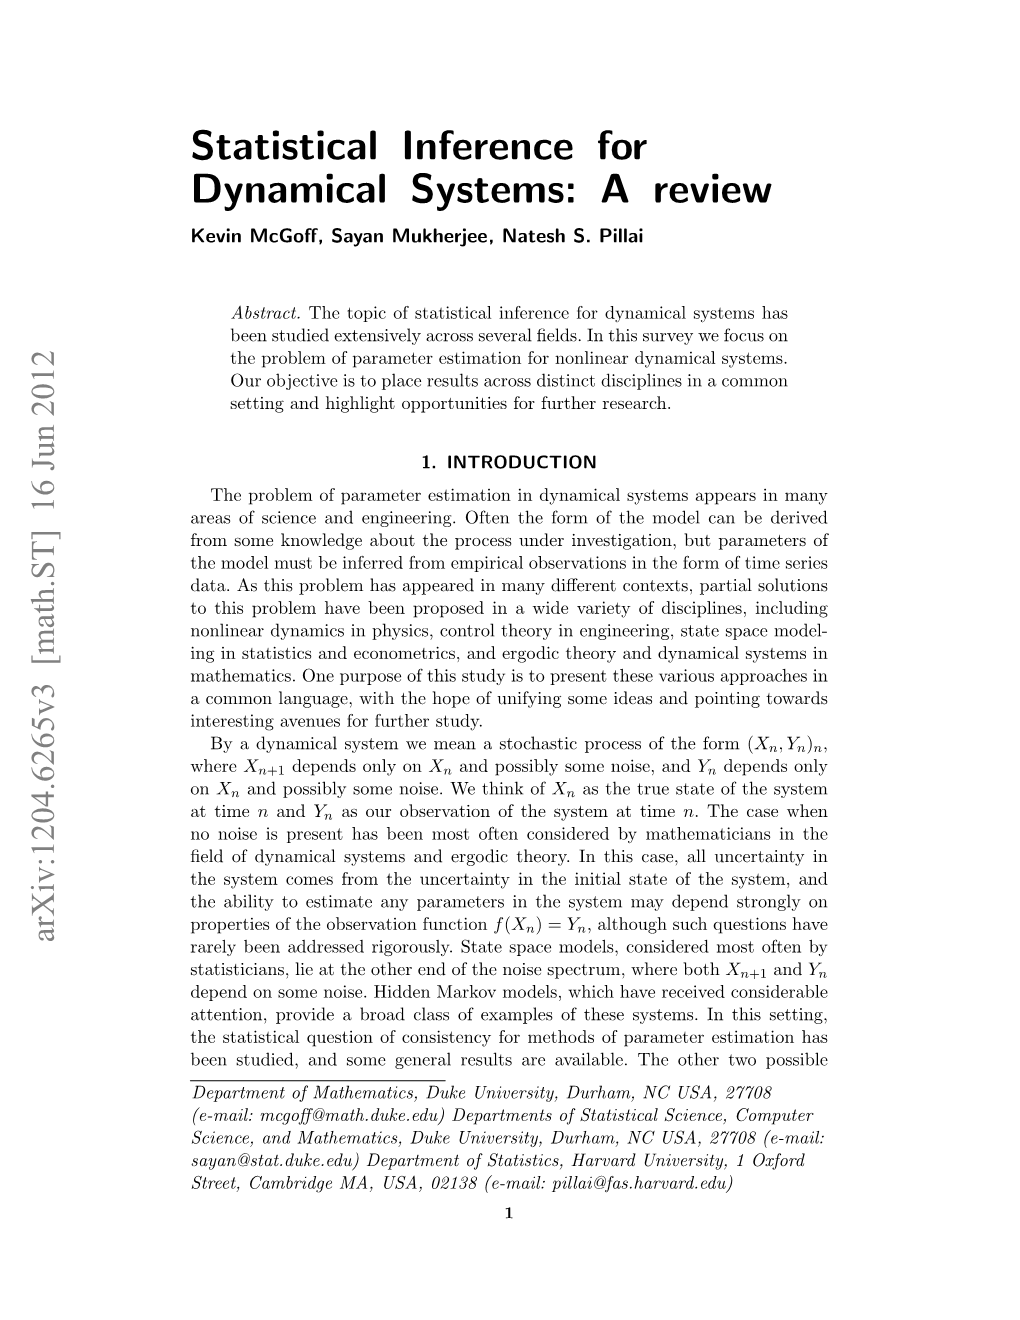 Statistical Inference for Dynamical Systems: a Review Kevin Mcgoﬀ, Sayan Mukherjee, Natesh S